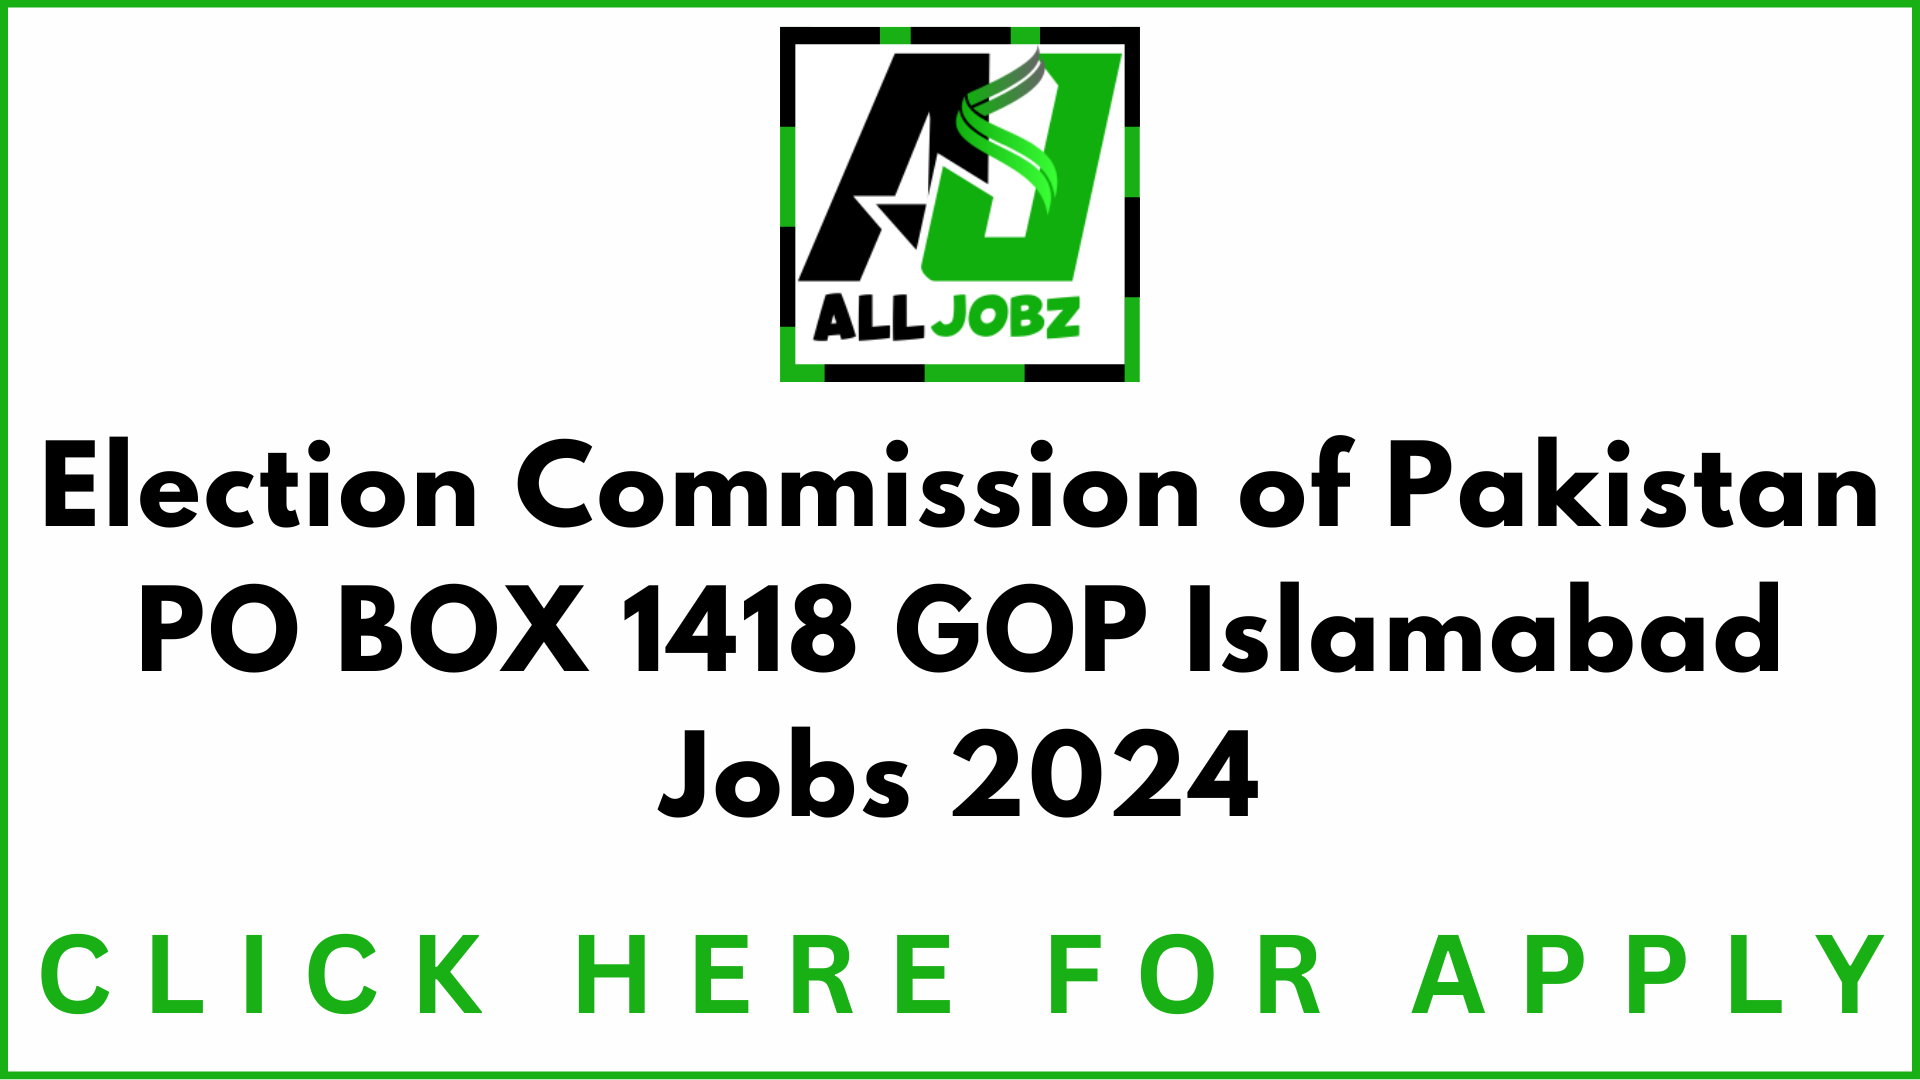 Election Commission Of Pakistan Jobs Online Apply, Election Commission Of Pakistan Jobs 2024, Ecp Jobs Advertisement, Ecp Jobs Login, Election Jobs Today In Pakistan, P.o. Box No. 1418, Gpo, Islamaba,